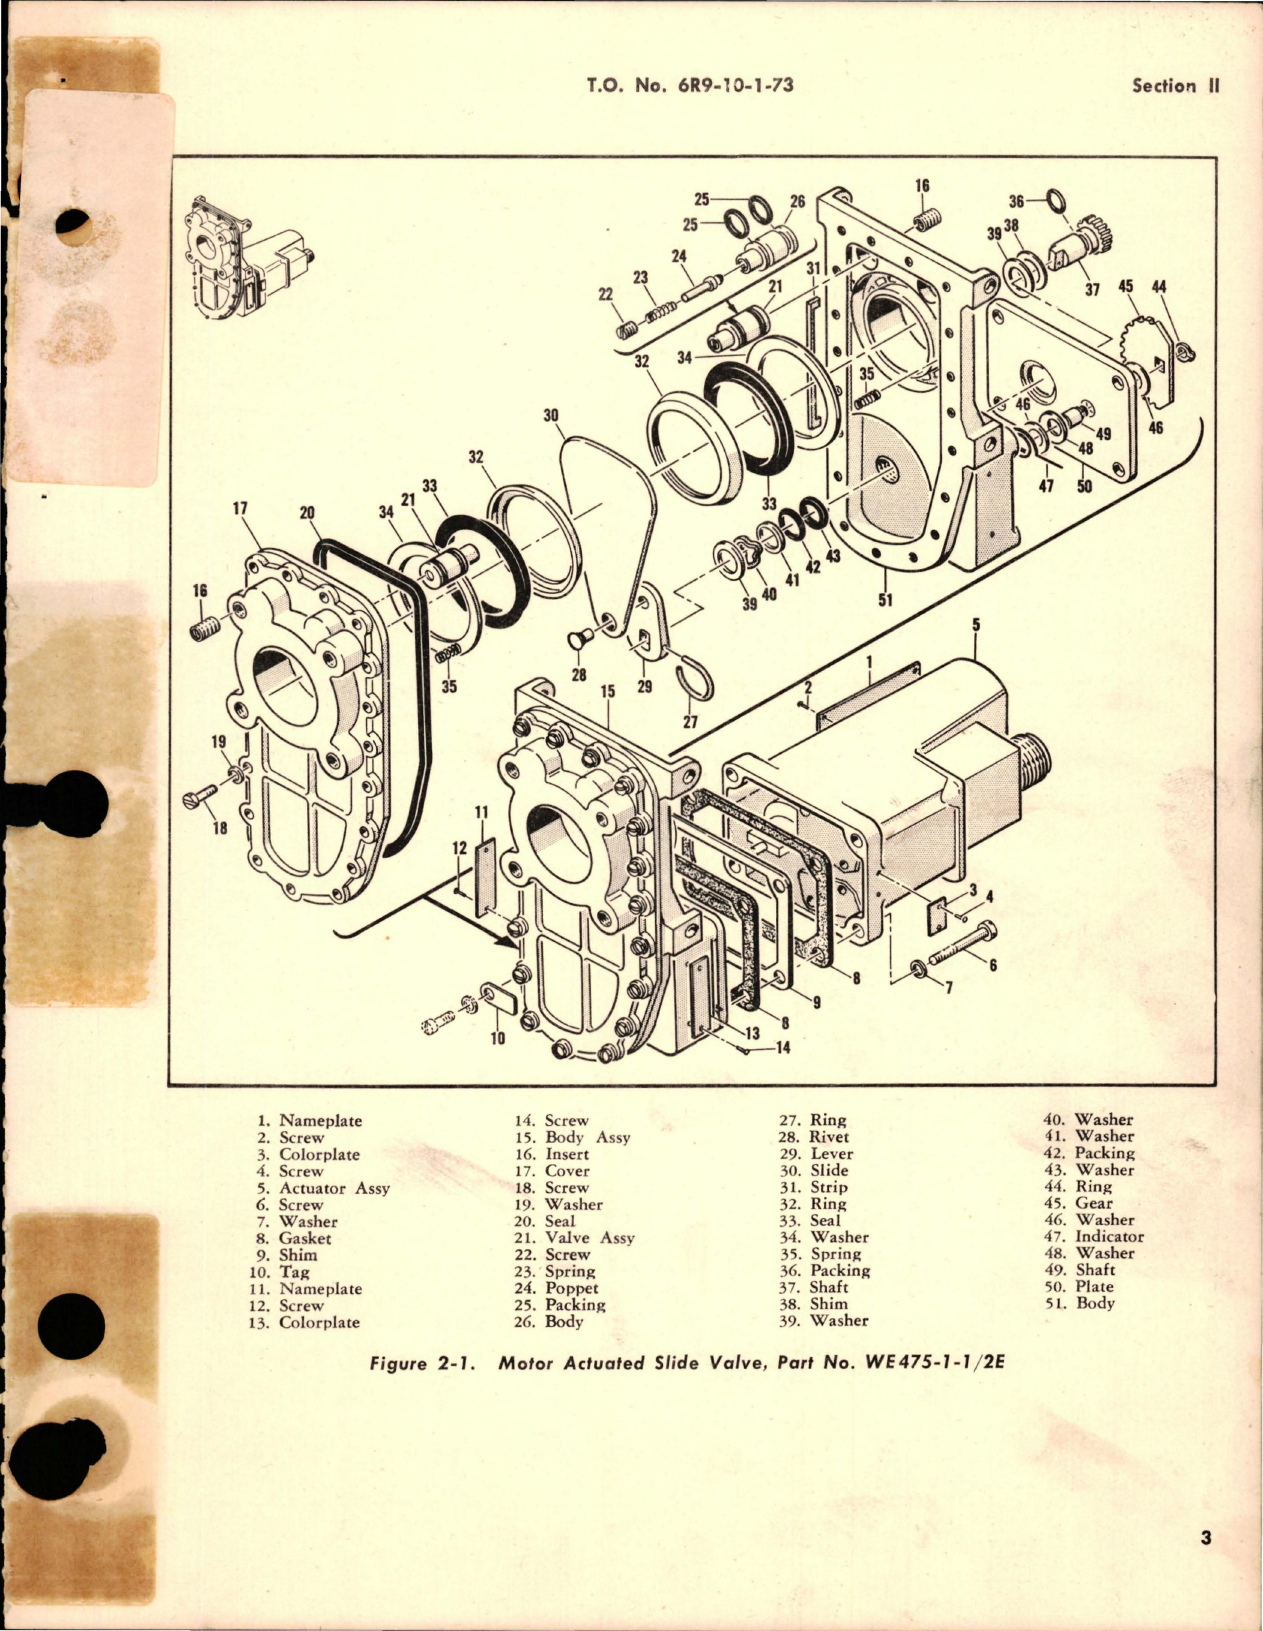 Sample page 7 from AirCorps Library document: Overhaul Instructions for Motor Actuated Slide Valve Assy (Whittaker